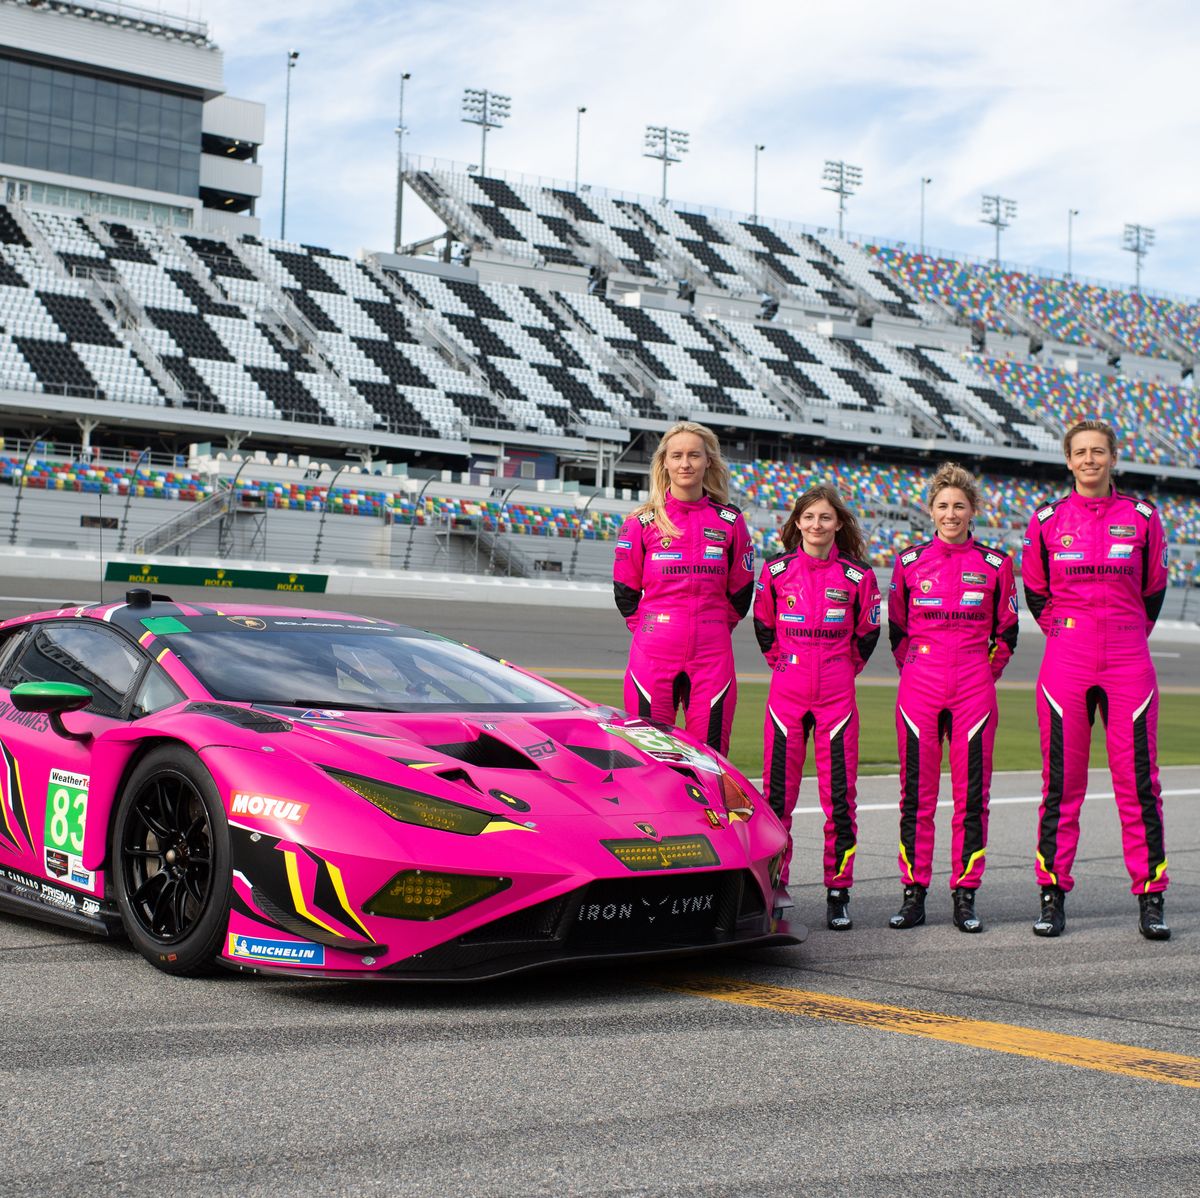 iron dames pose with their lambo